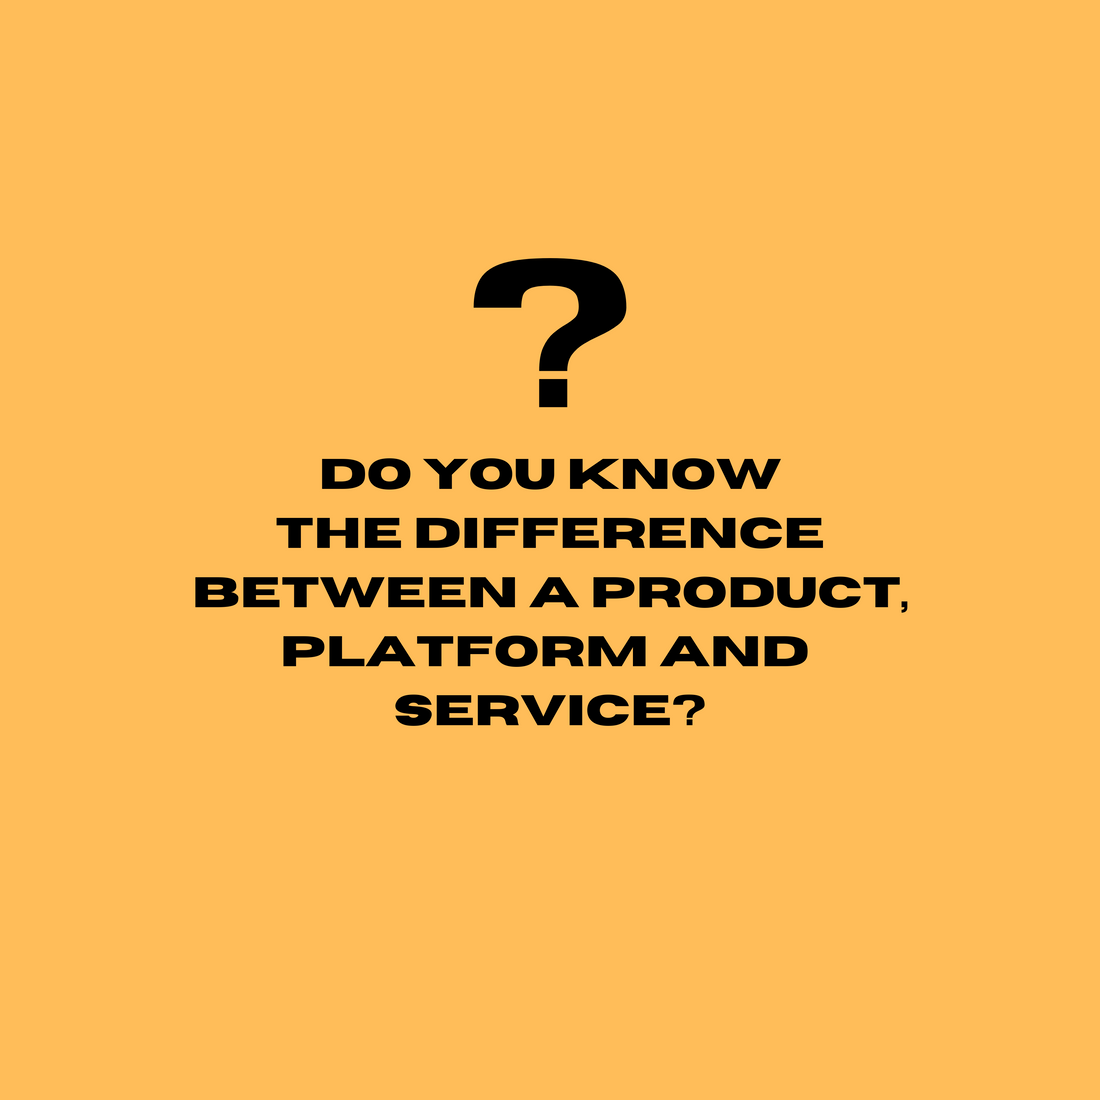 What is a product, platform and service?